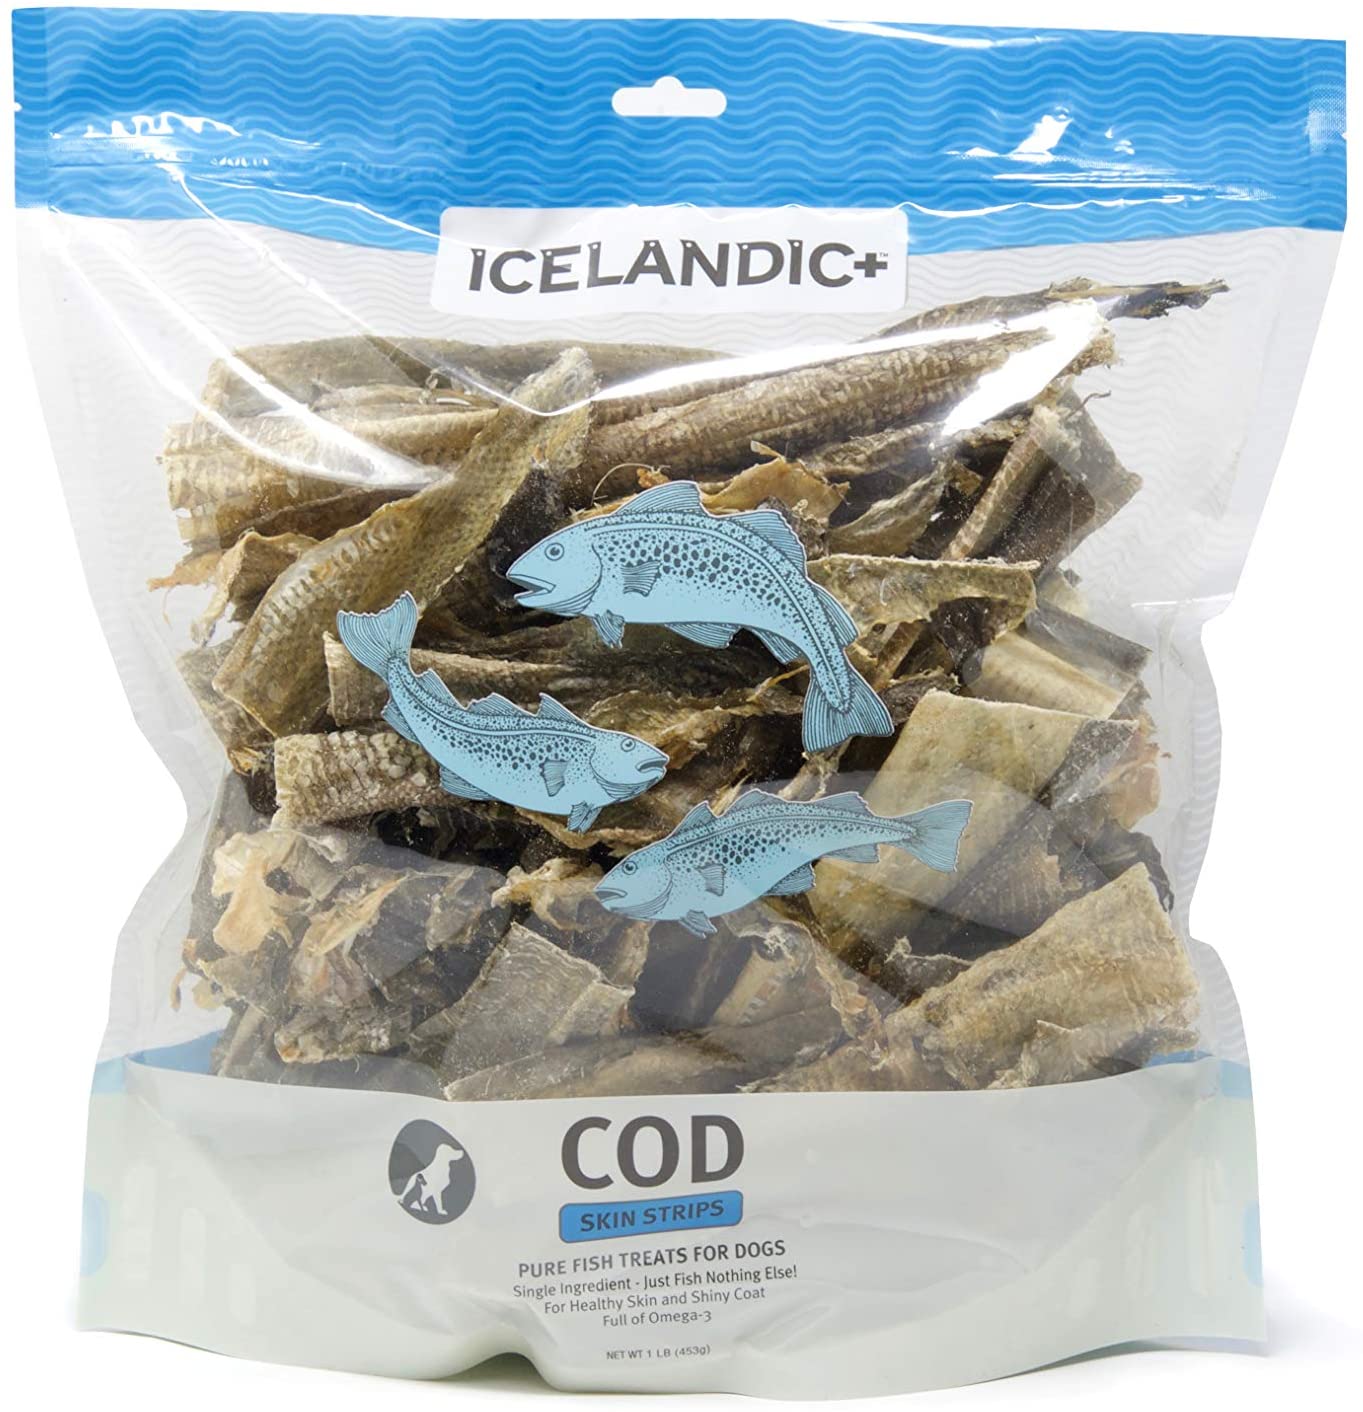 Icelandic+ Cod Skin (Mixed Pieces) Natural Dehydrated Cat and Dog Treats - 8 oz  